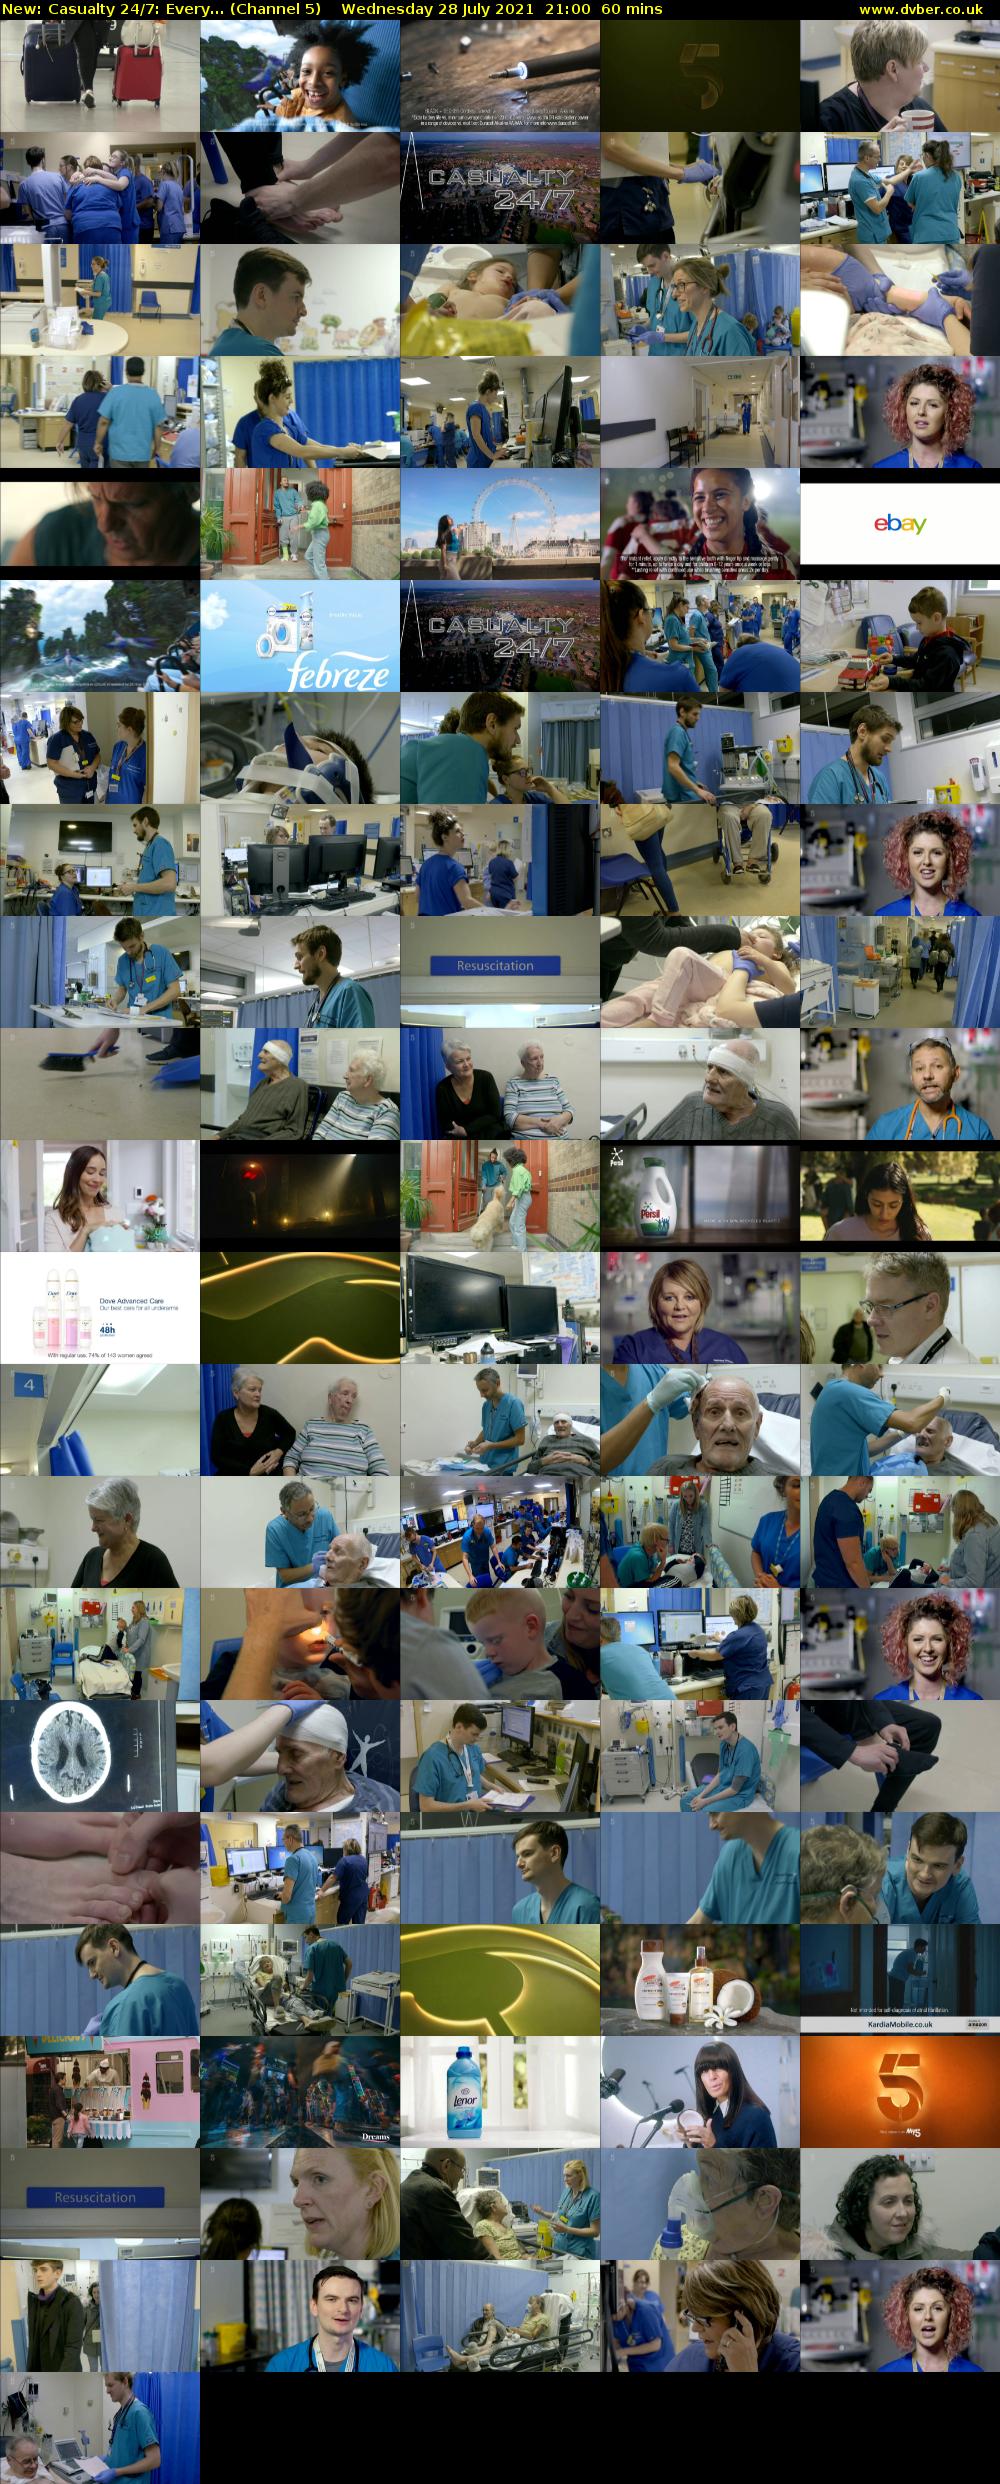 Casualty 24/7: Every... (Channel 5) Wednesday 28 July 2021 21:00 - 22:00